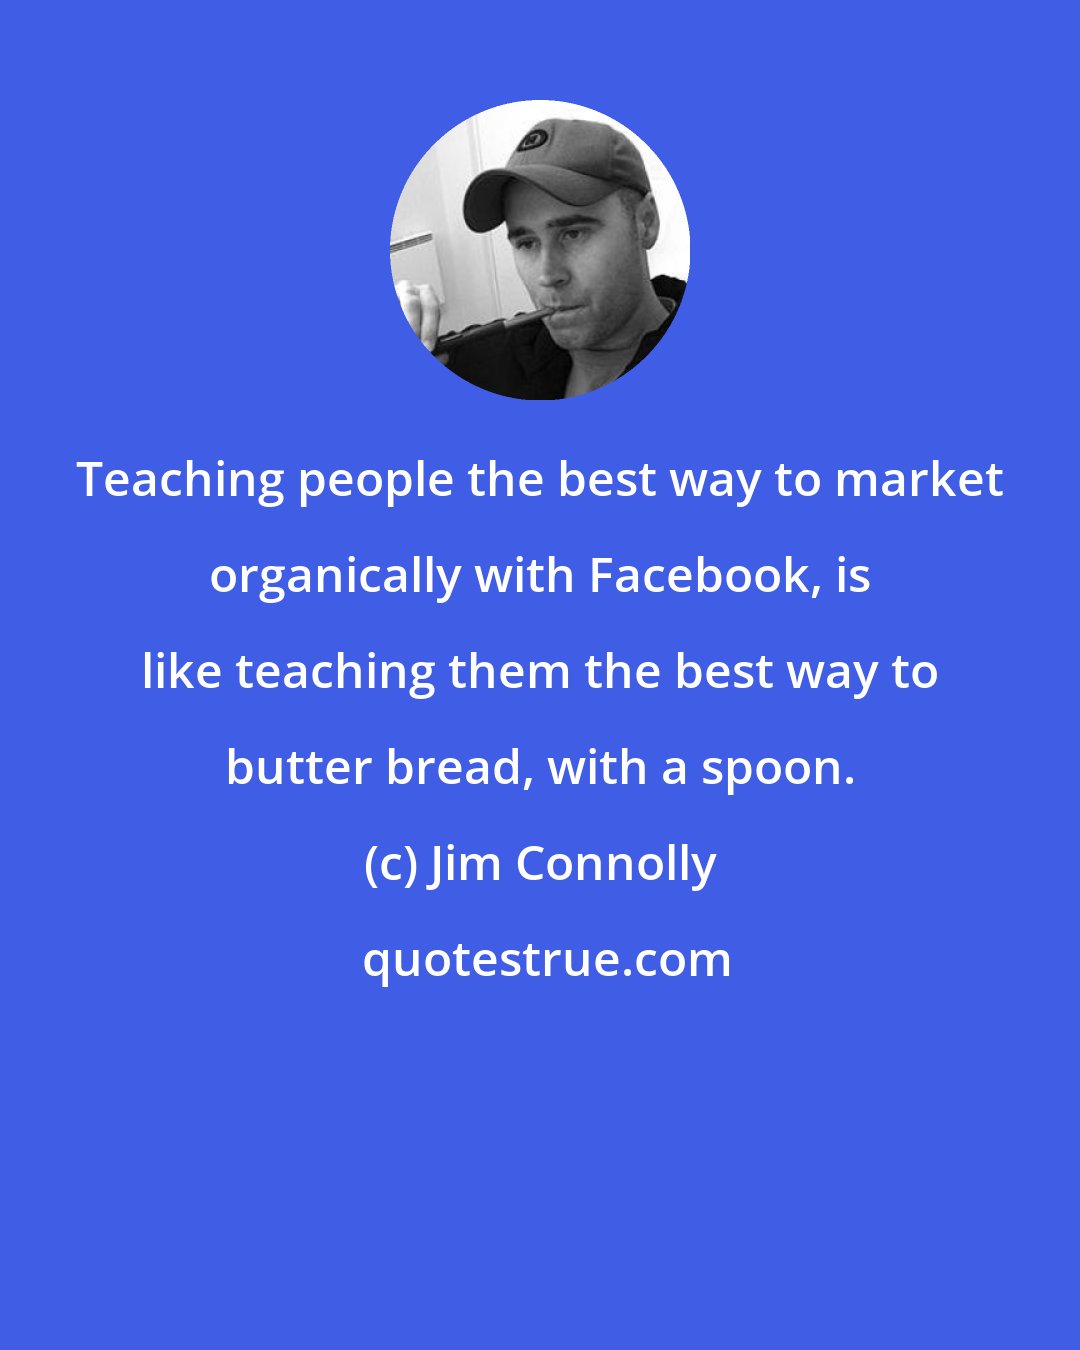 Jim Connolly: Teaching people the best way to market organically with Facebook, is like teaching them the best way to butter bread, with a spoon.